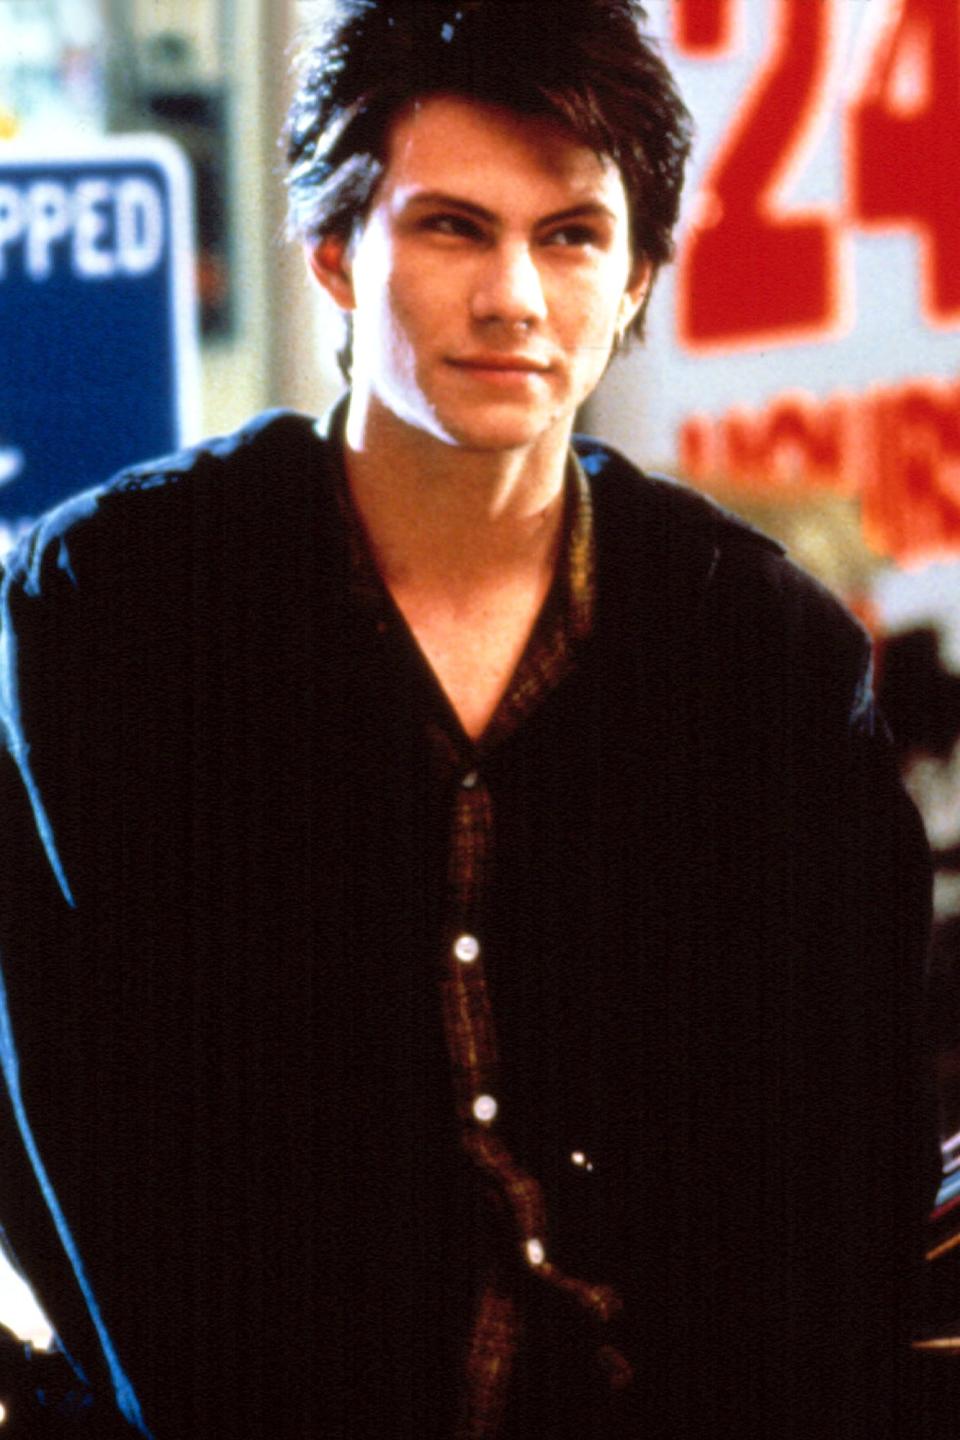 Christian Slater as J.D. in Heathers